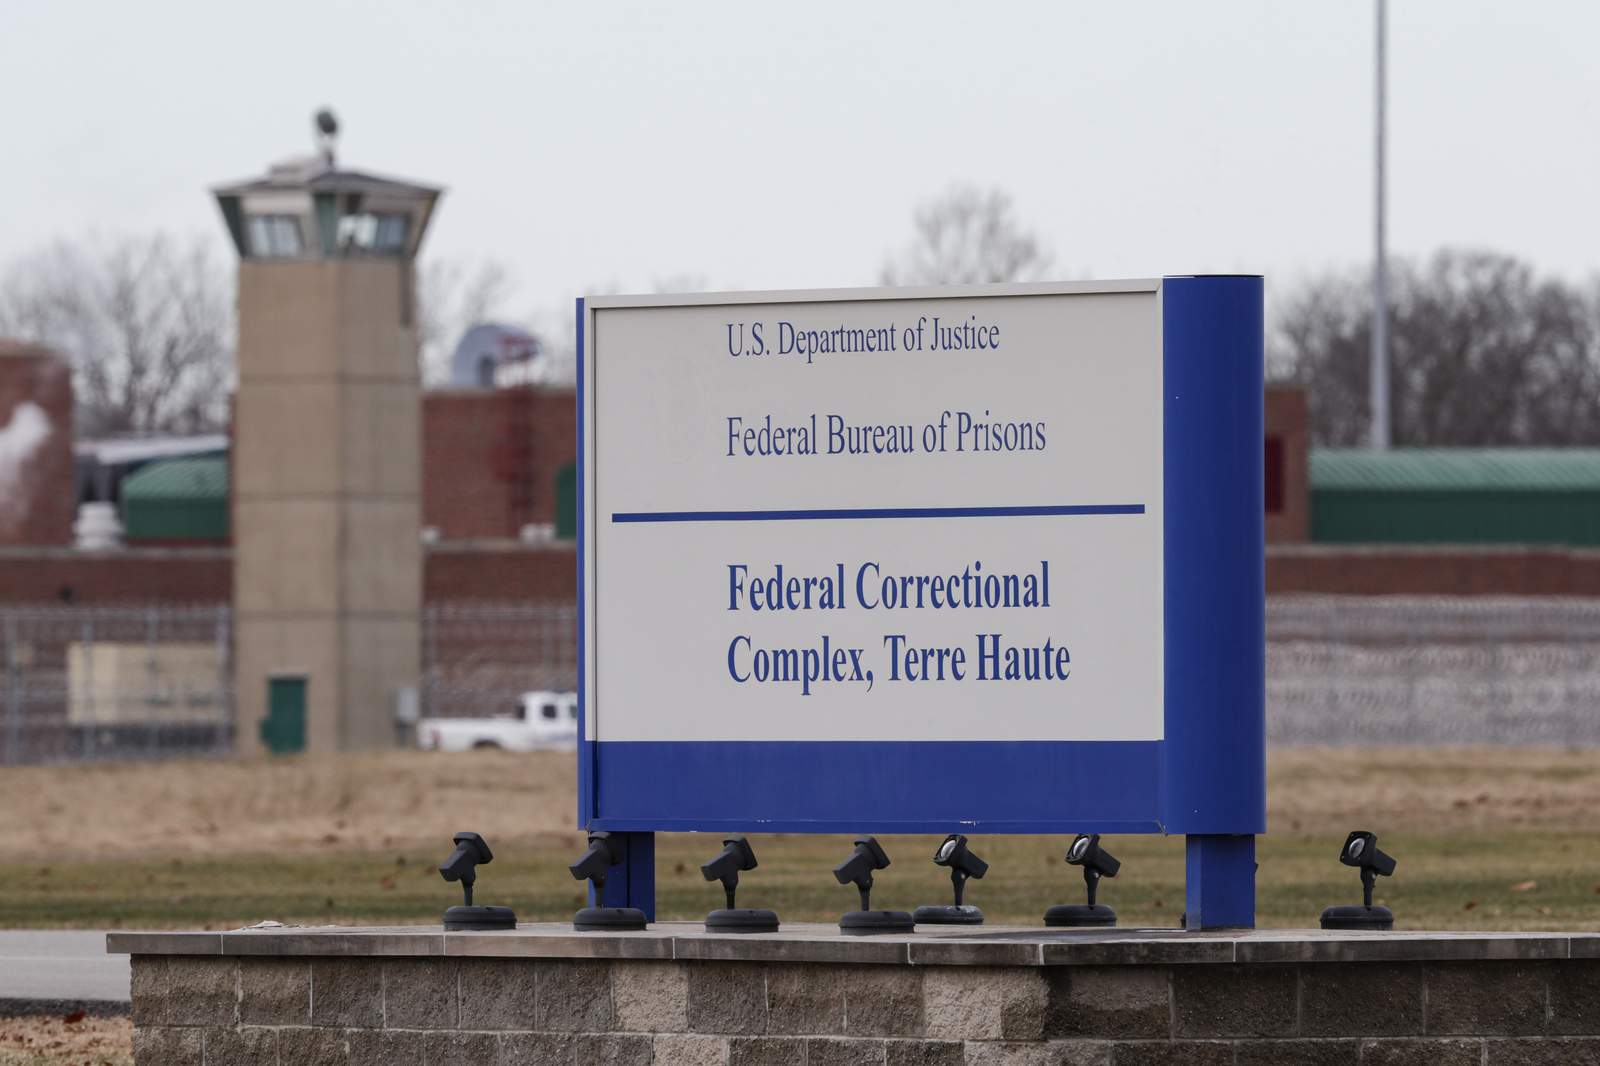 Supreme Court clears way for execution of federal prisoner